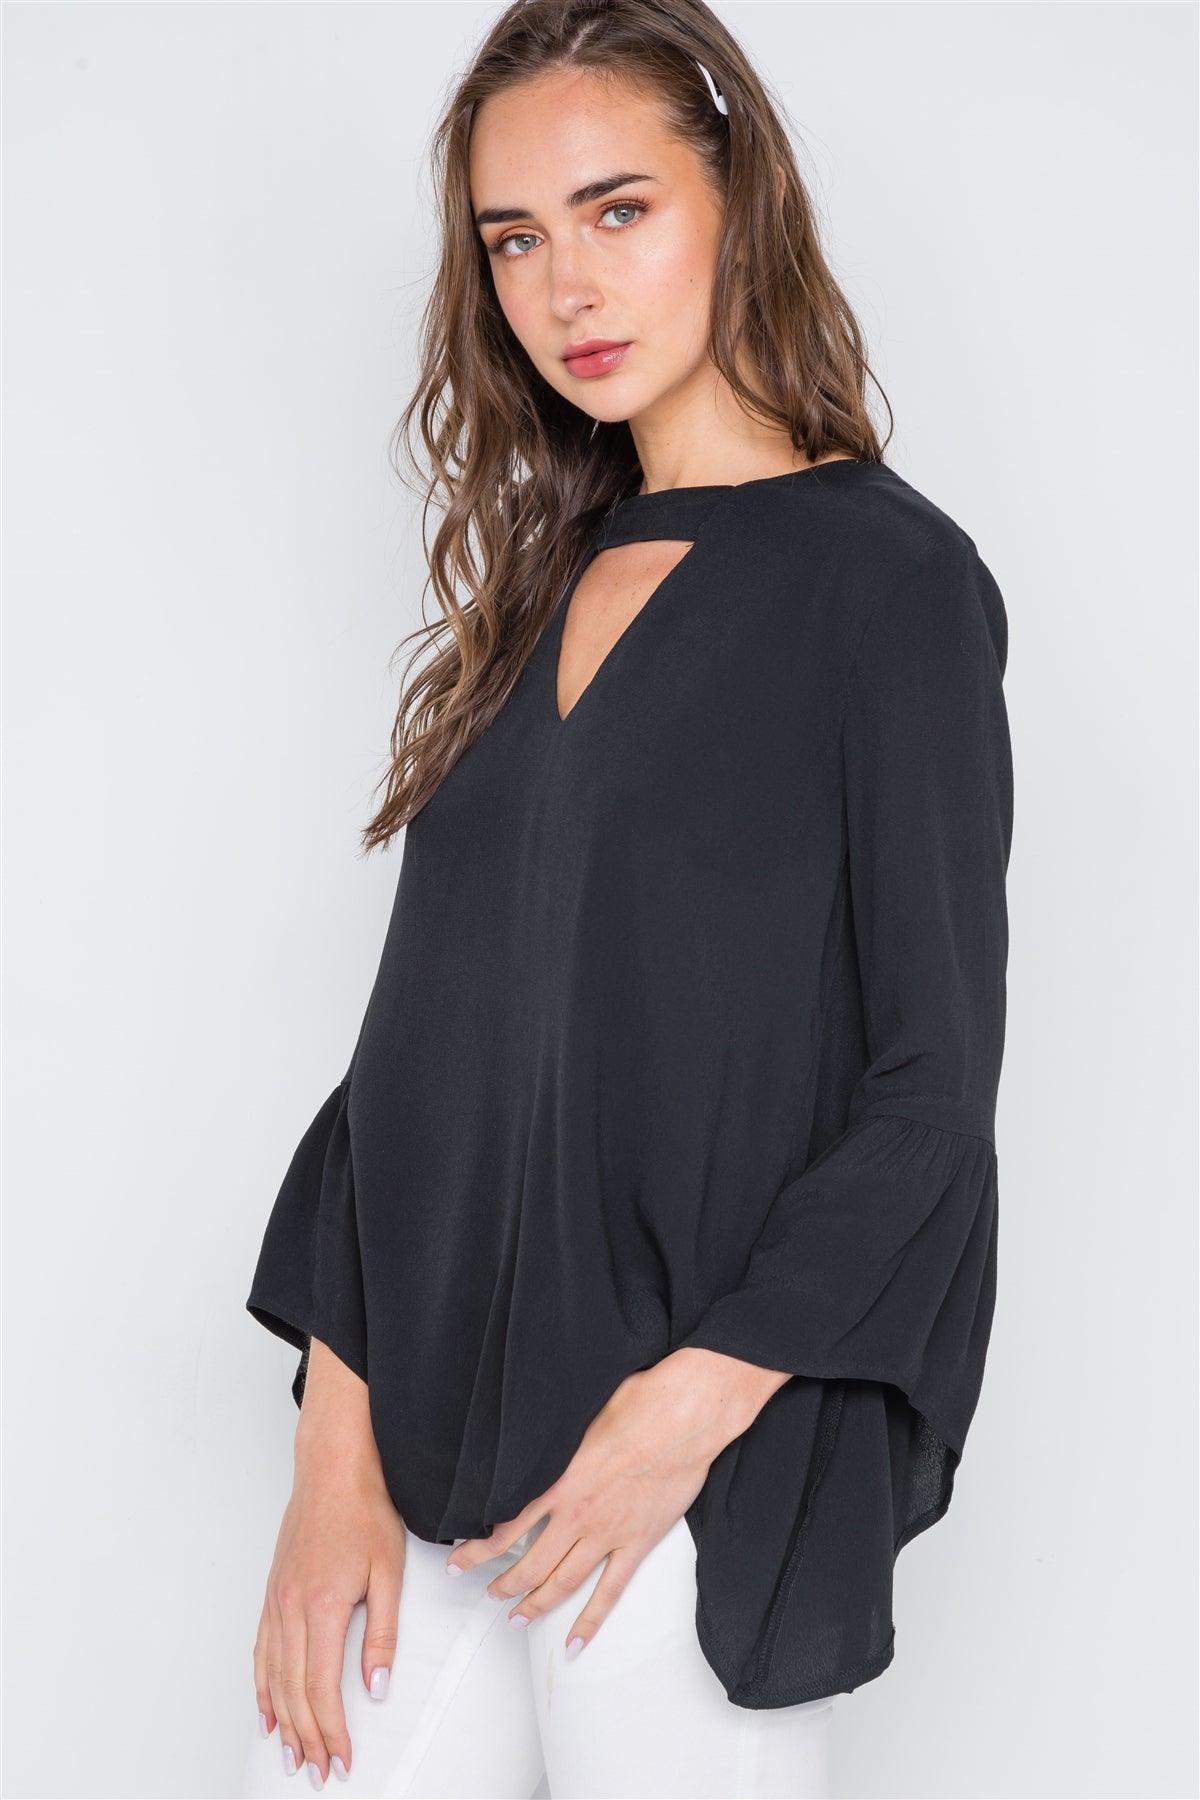 Black V-Cut Out Long Bell Sleeve Solid Top /2-1-2